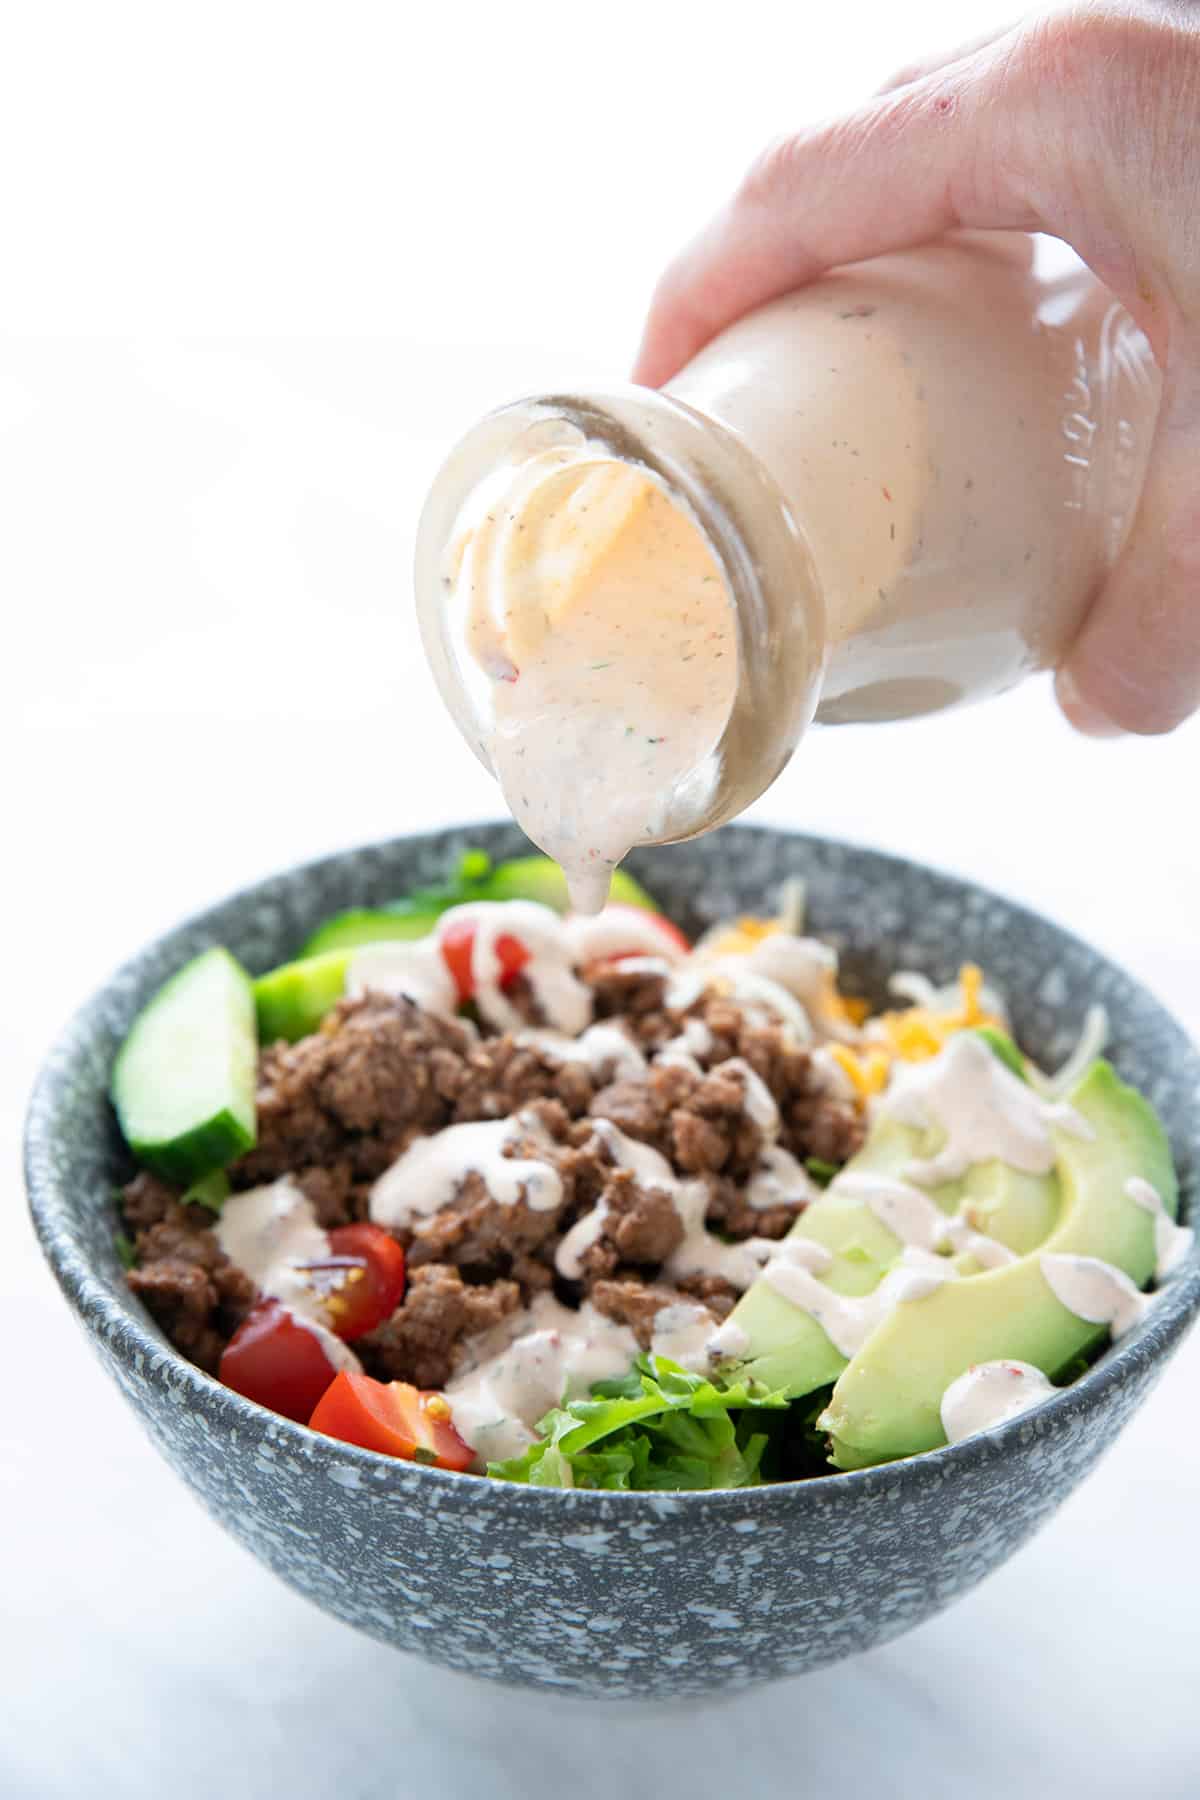 Chipotle ranch dressing being drizzled over a bowl of salad.